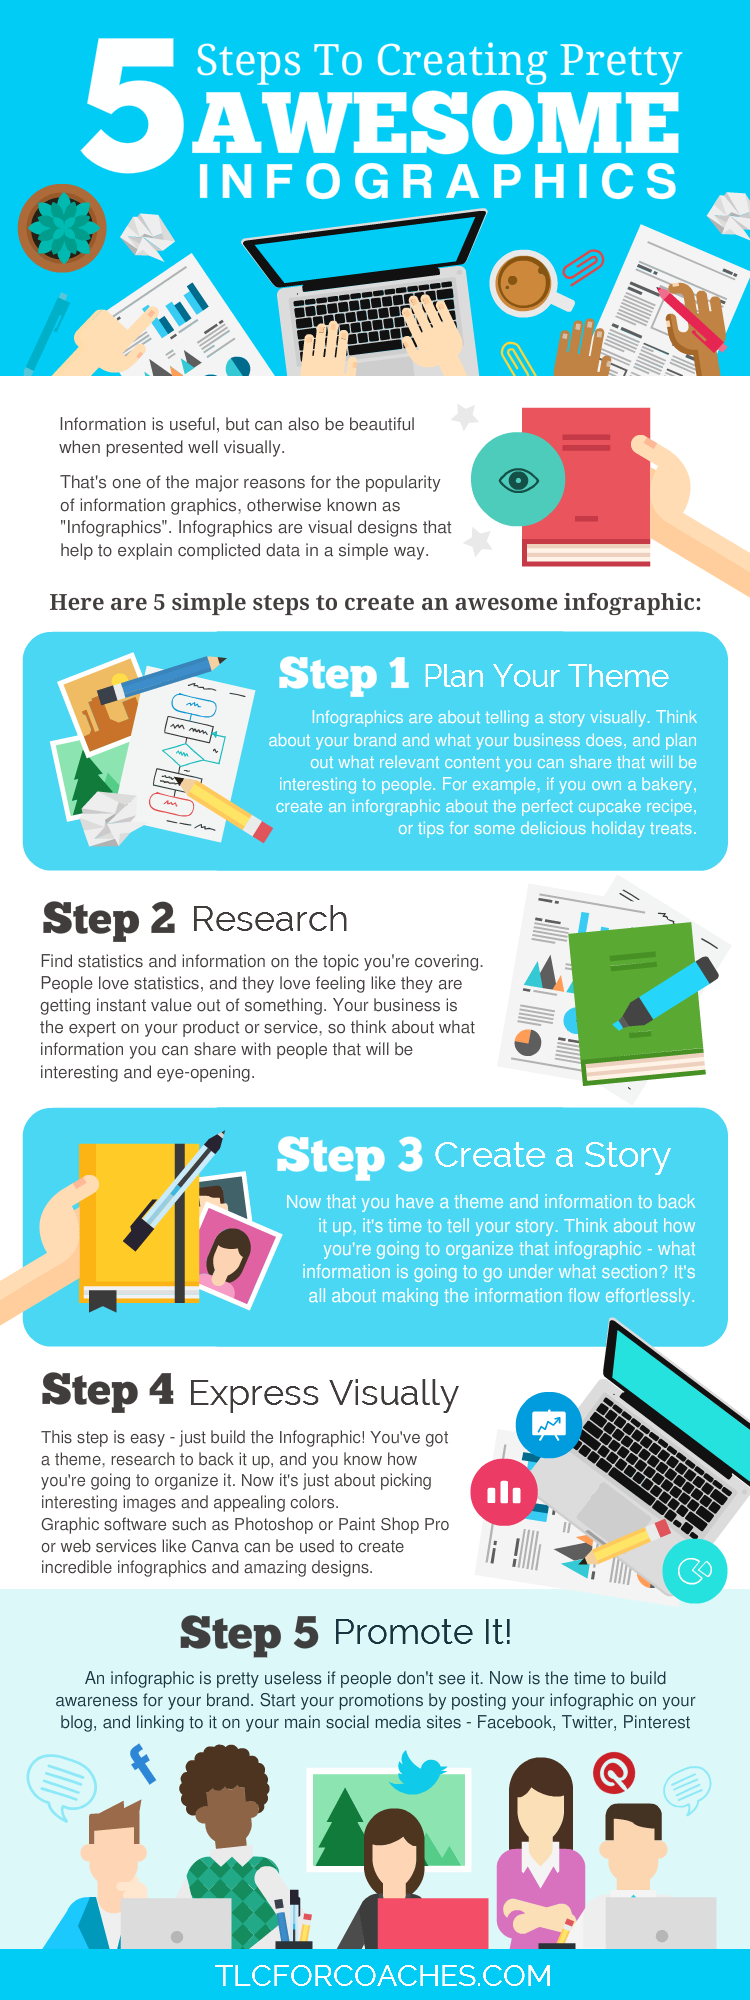 Infographic-final | Infographic, Online infographic, Infographic creator